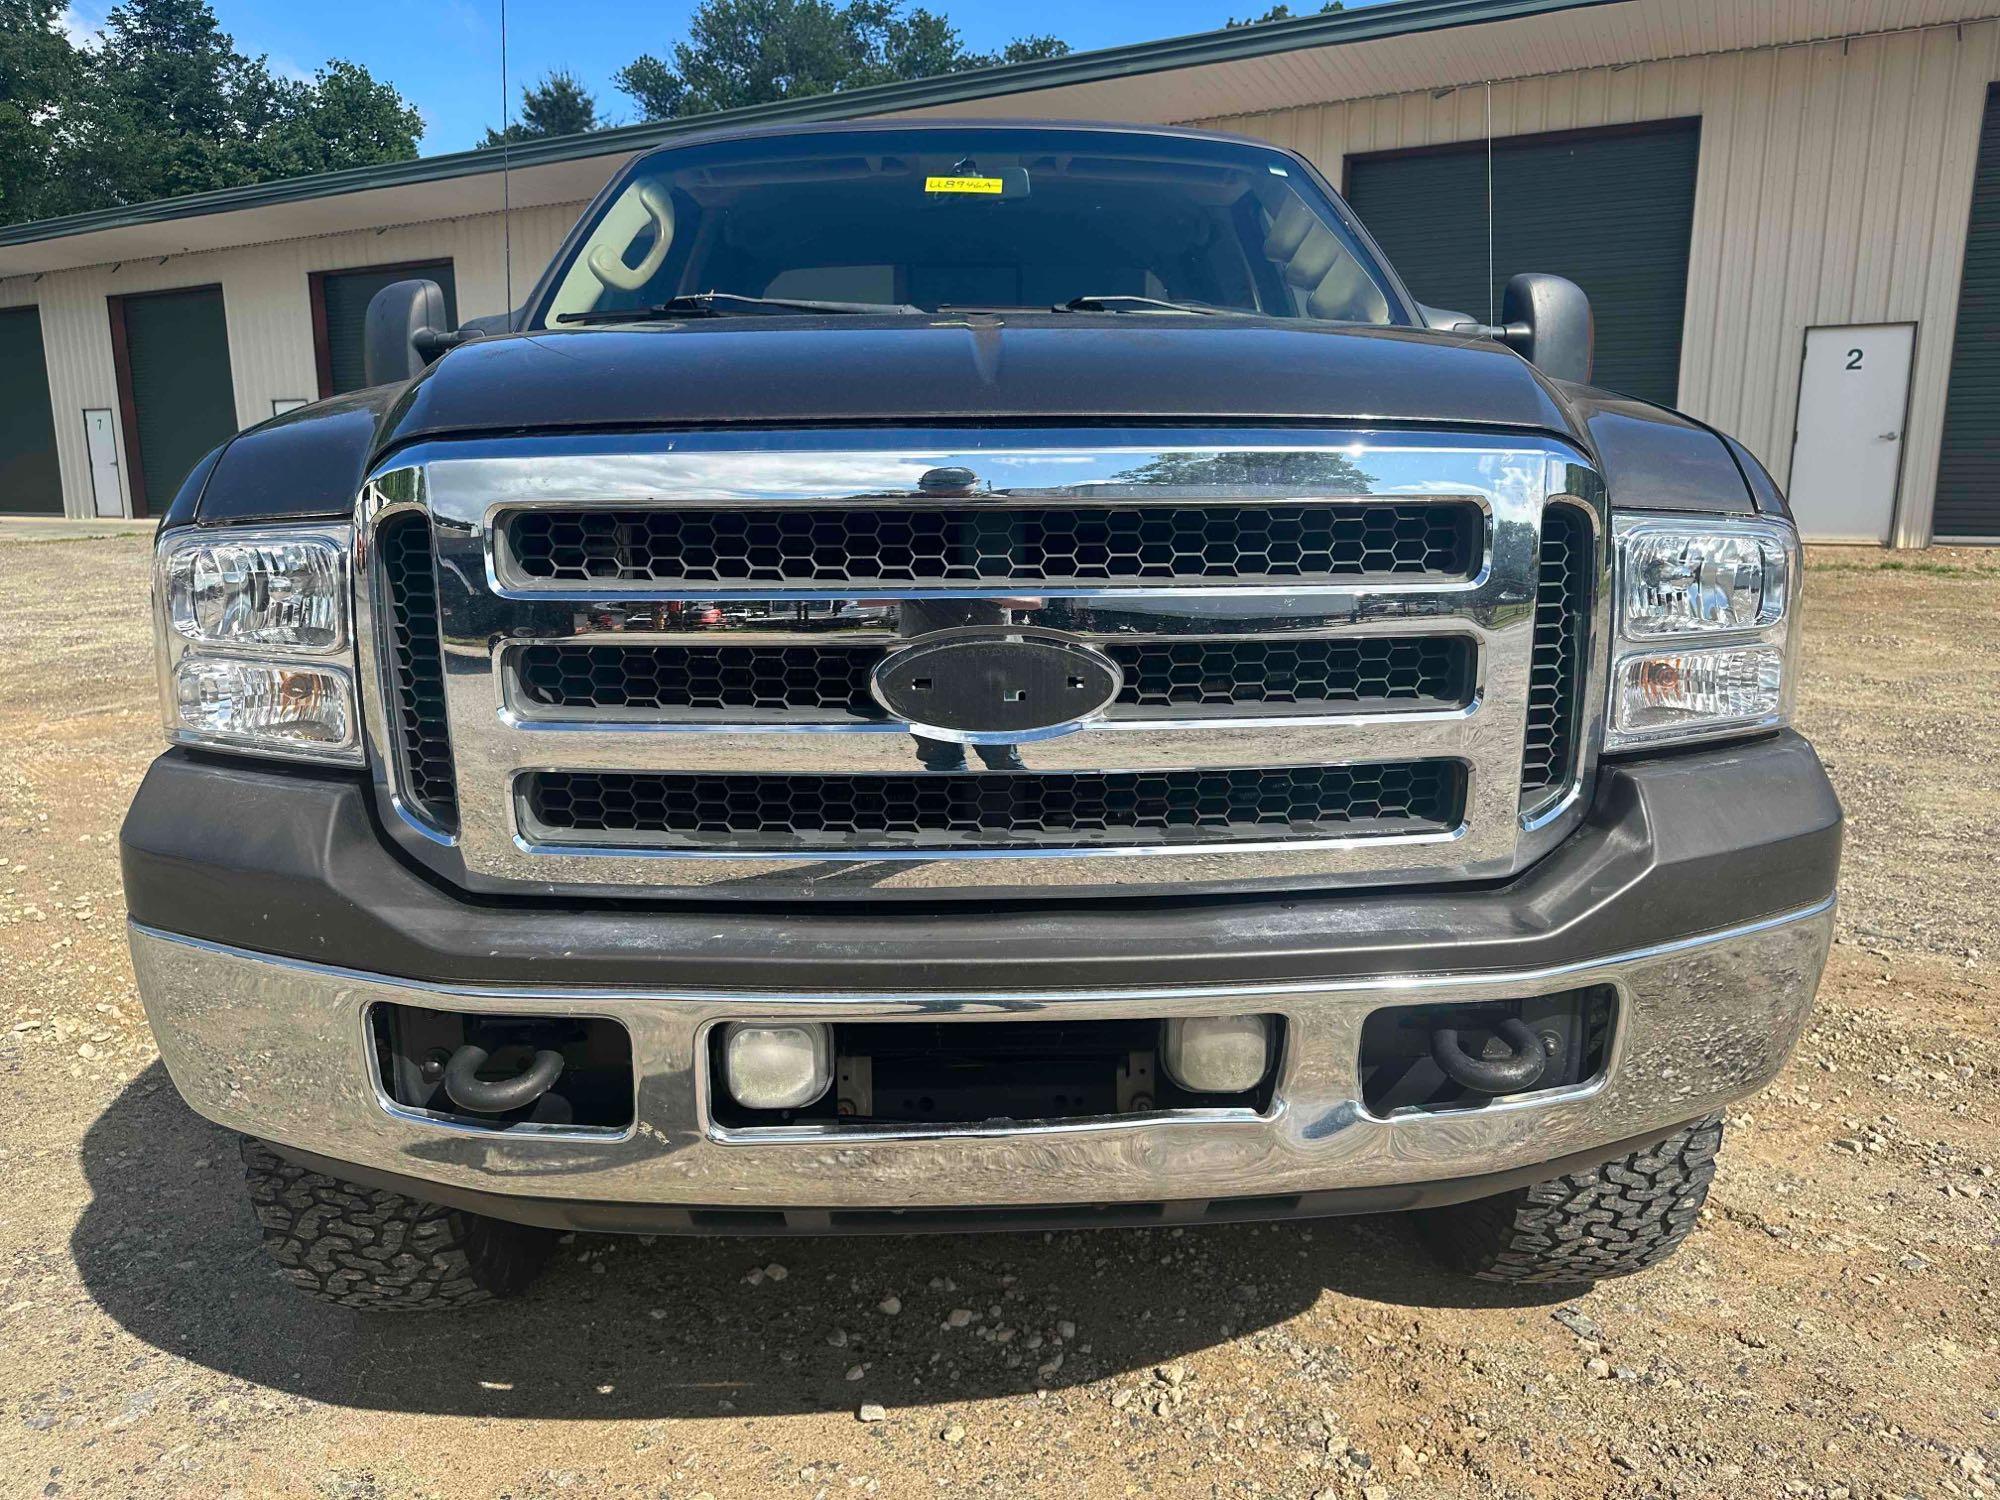 2007 Ford F-250 Pickup 4x4 Truck, VIN # 1FTSW21P07EA62560